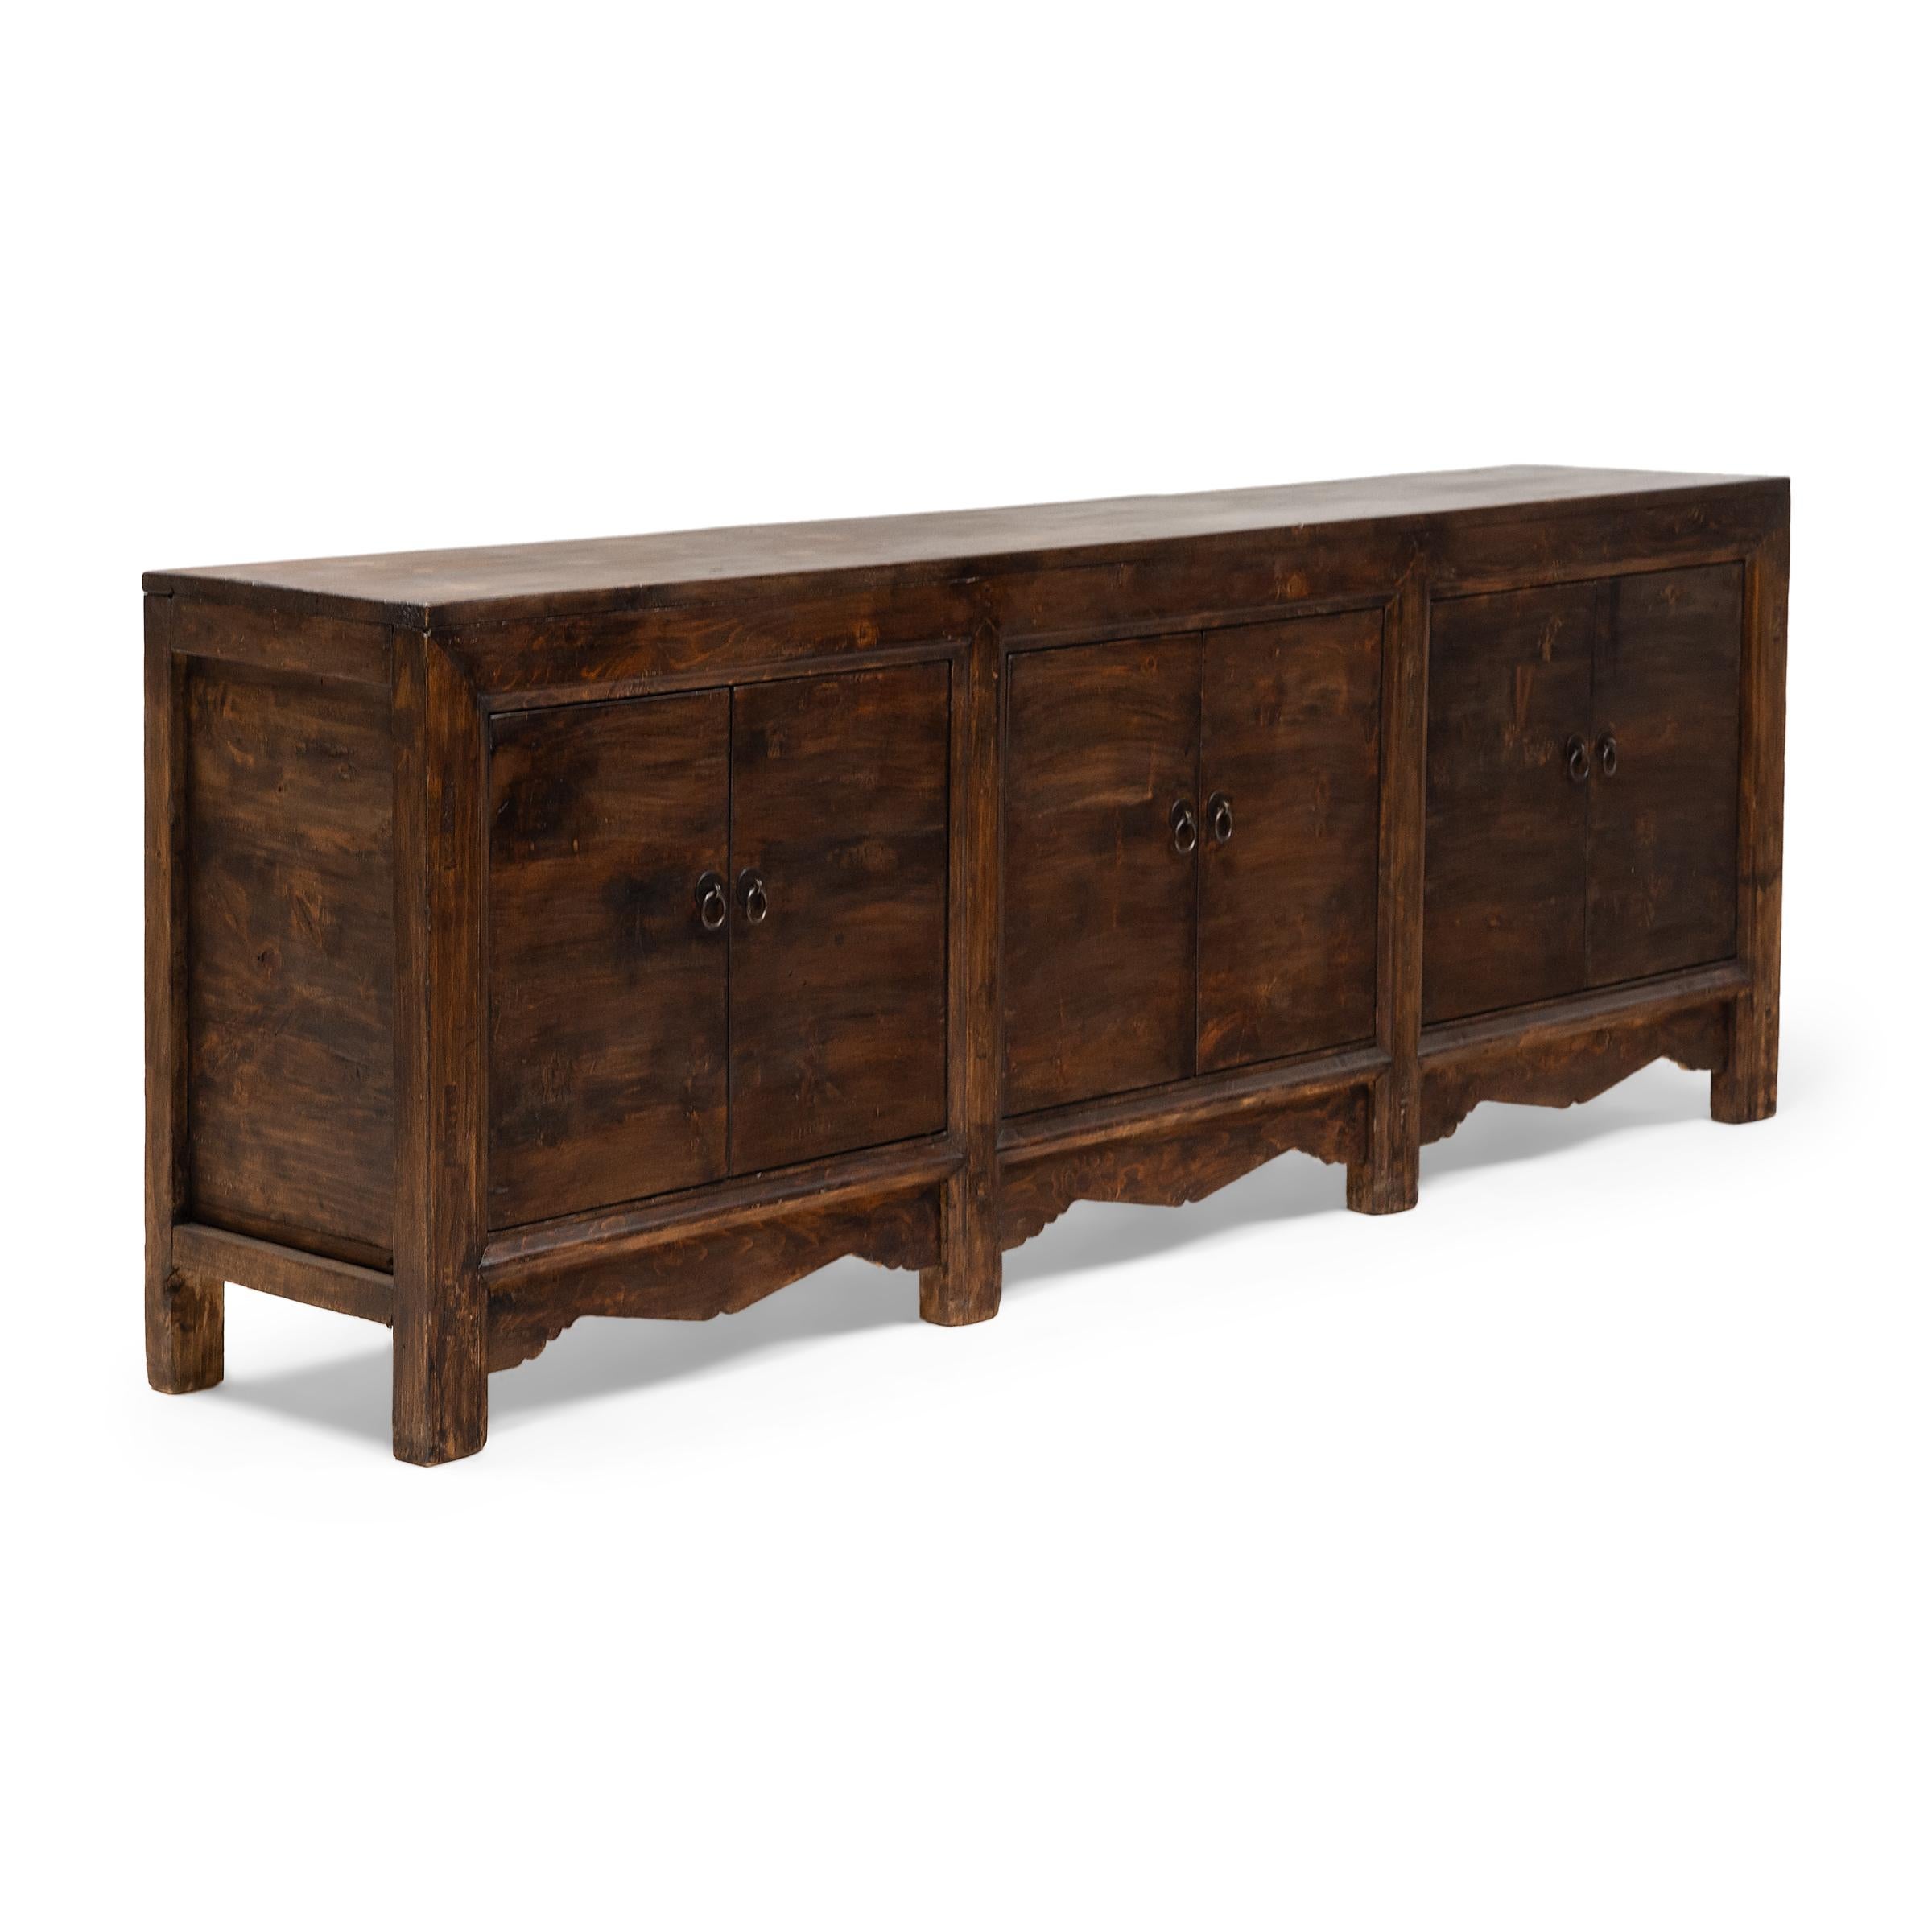 Chinese Pasture Sideboard, c. 1900 In Good Condition For Sale In Chicago, IL